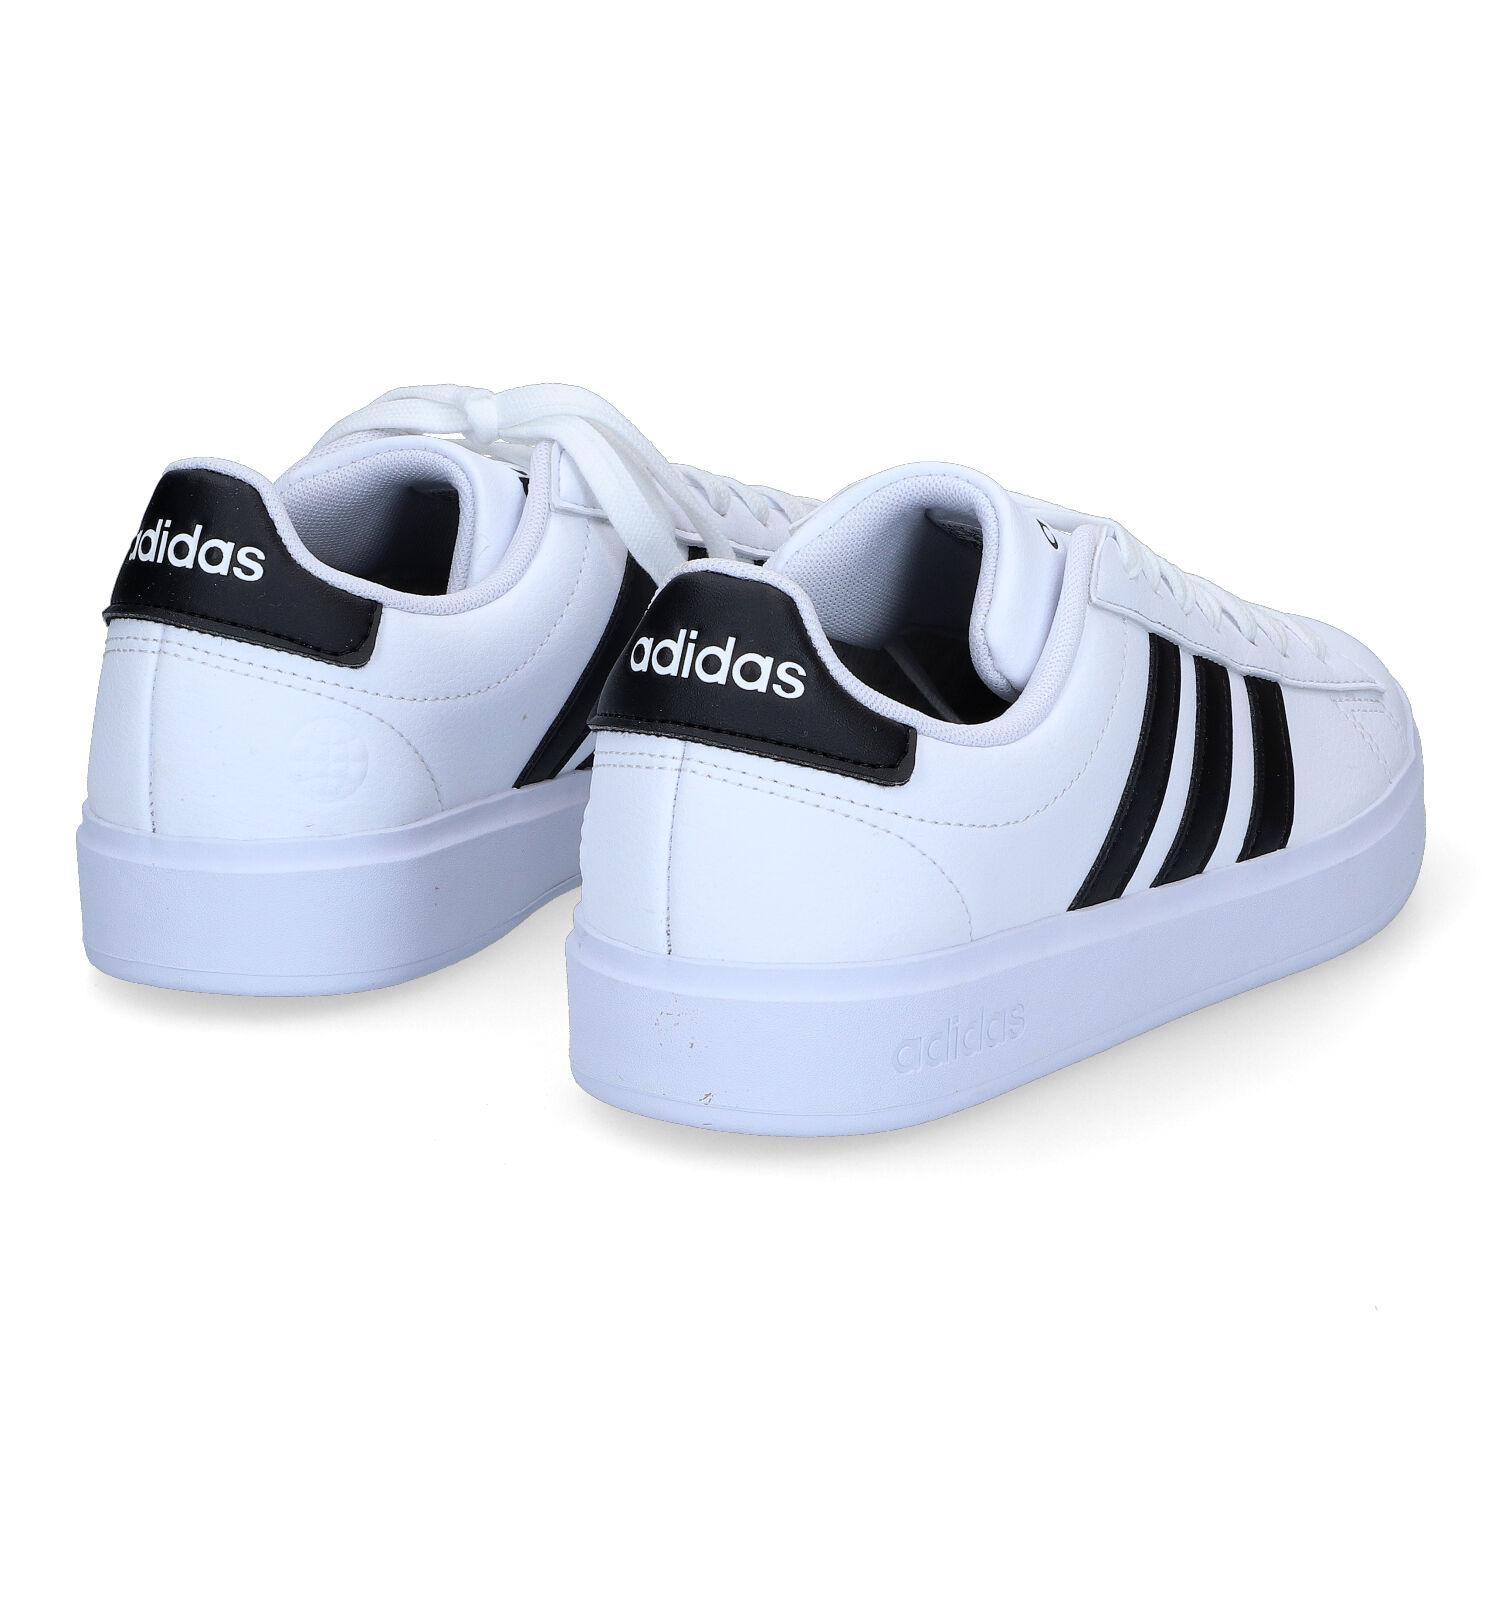 Hoes Passend Hub adidas Grand Court 2.0 Witte Sneakers Dames Sportieve sneakers | TORFS.BE